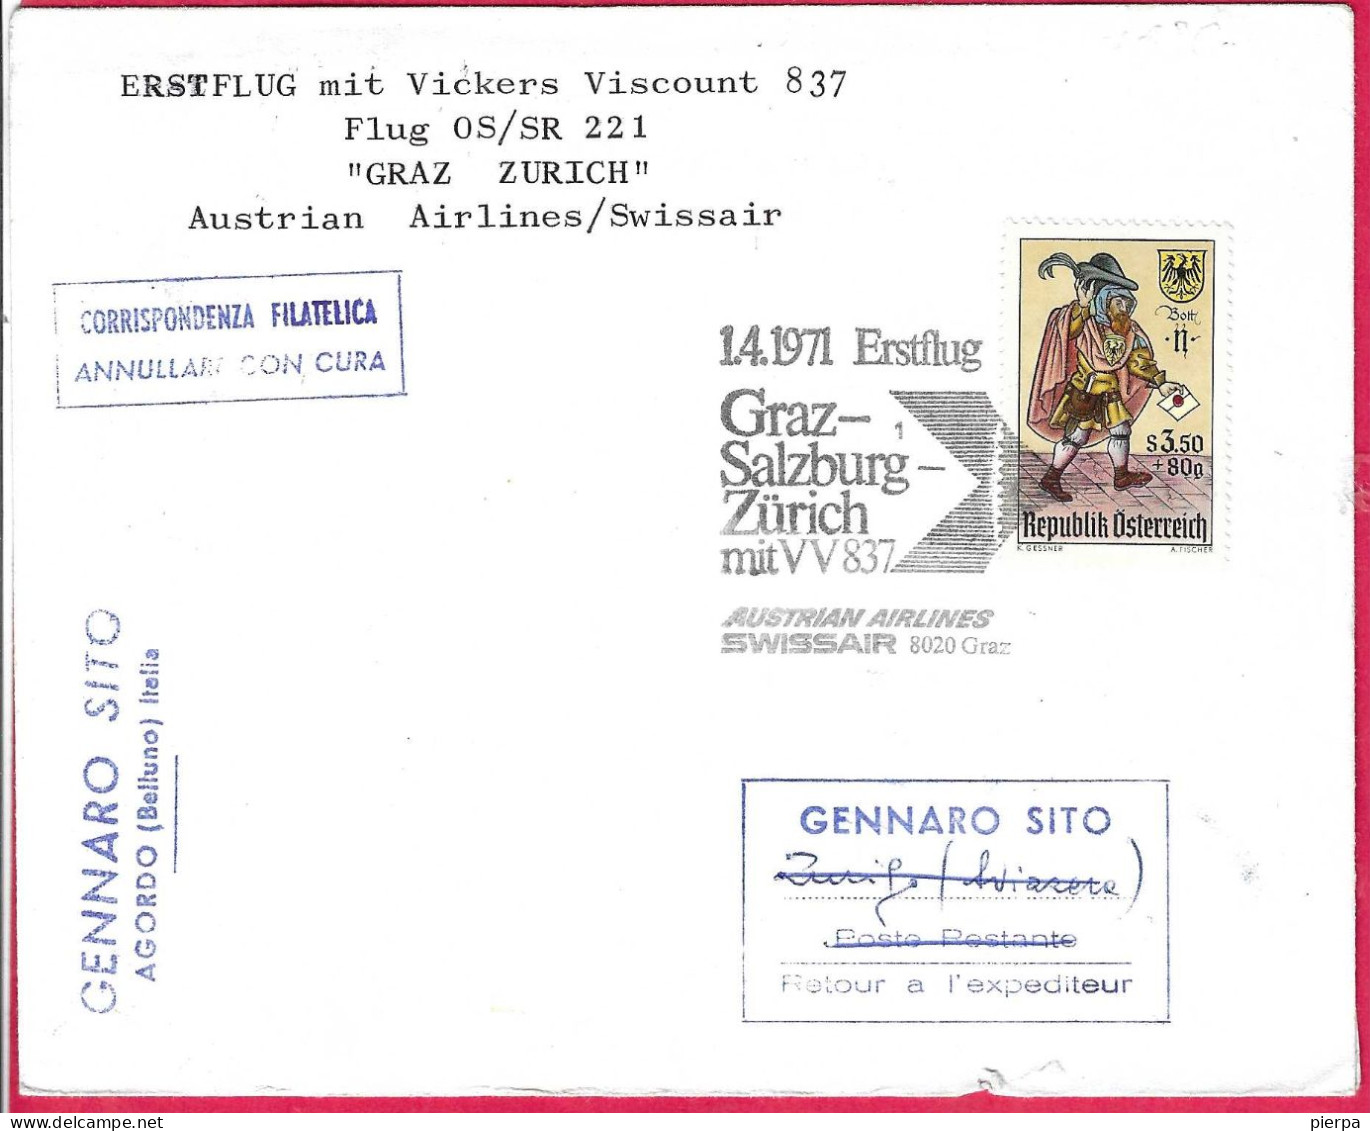 AUSTRIA - ERSTFLUG AUA SWISSAIR WITH VICJERS VISCOUNT 837- FROM GRAZ TO ZURICH*1.4.1971* ON LARGE COVER - Premiers Vols